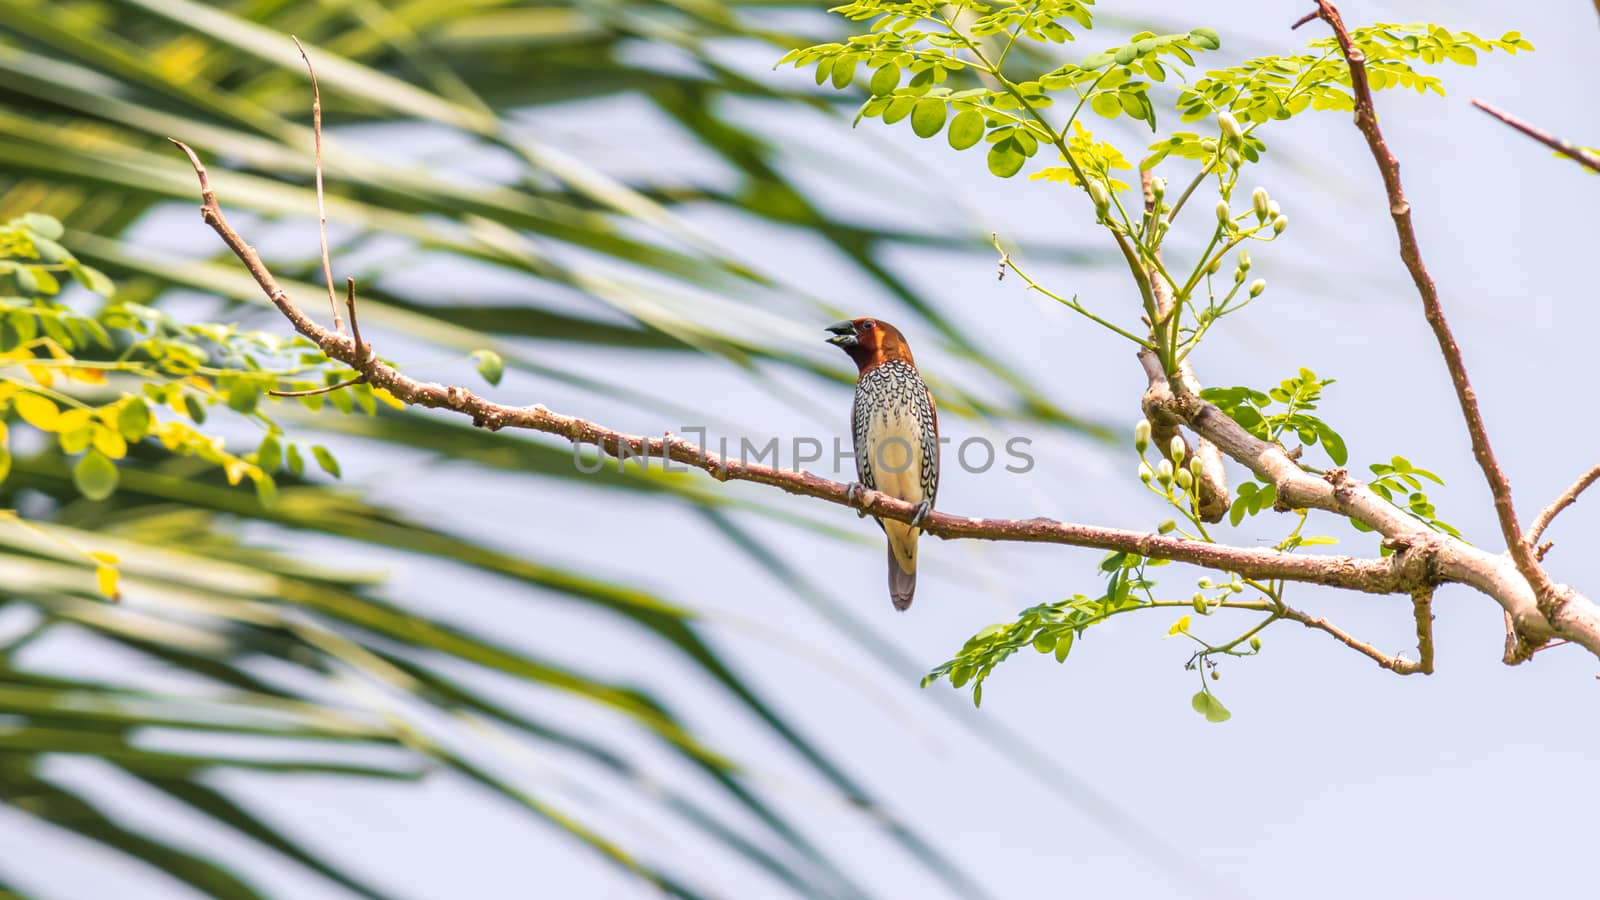 Scaly-breasted munia singings songs while perched on tree branch soft blurry background nature. by nilanka